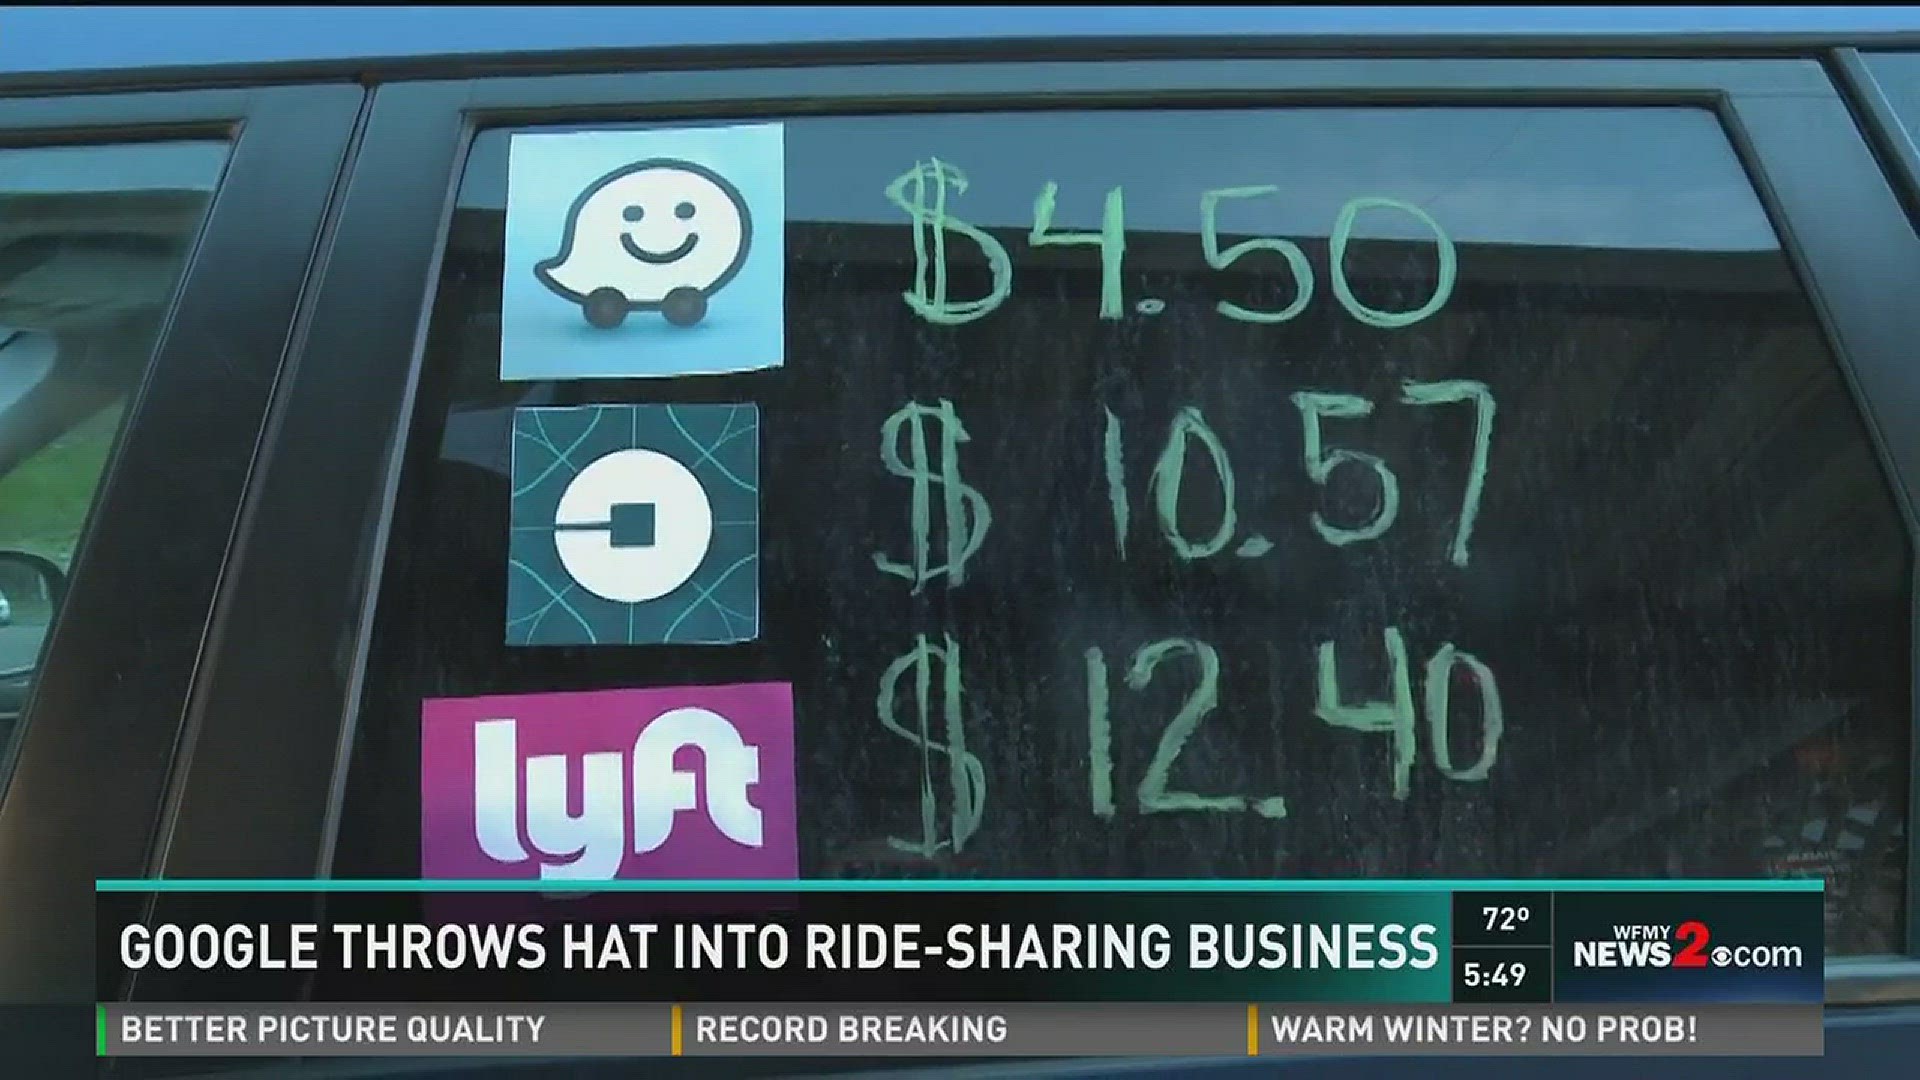 Google Throws Hat Into Ride-Sharing Business